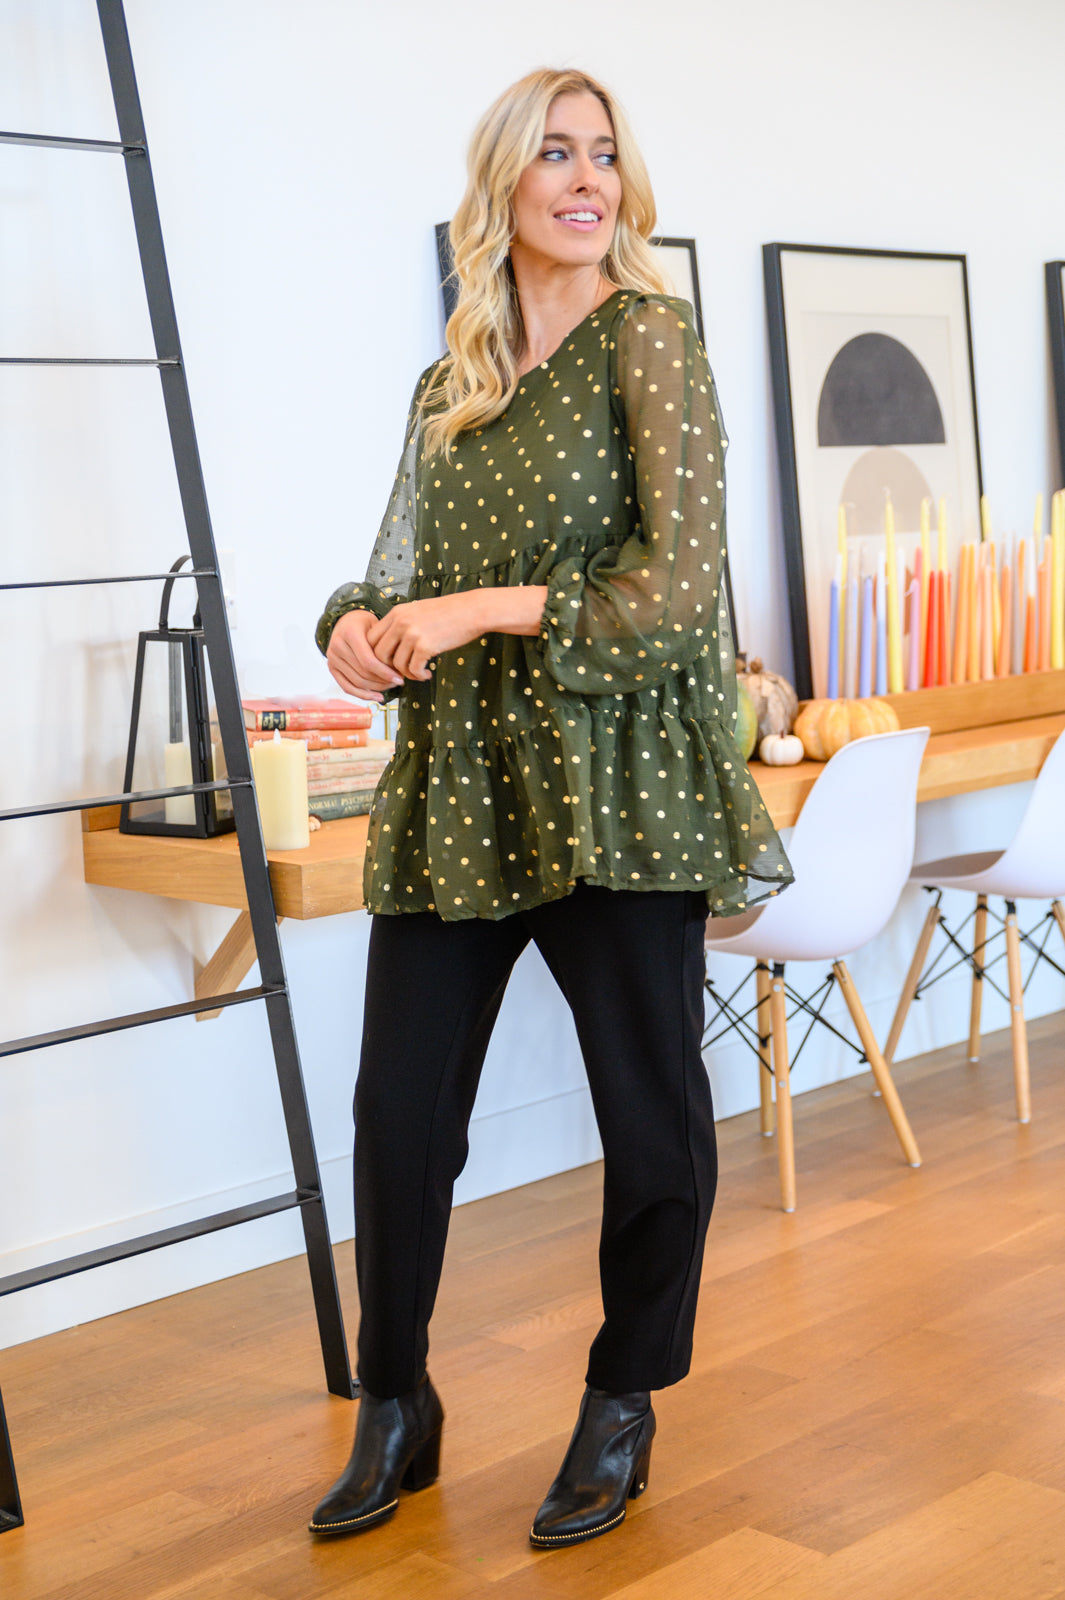 Coya Metallic Dot Tiered Blouse in Olive - 12/1/2022